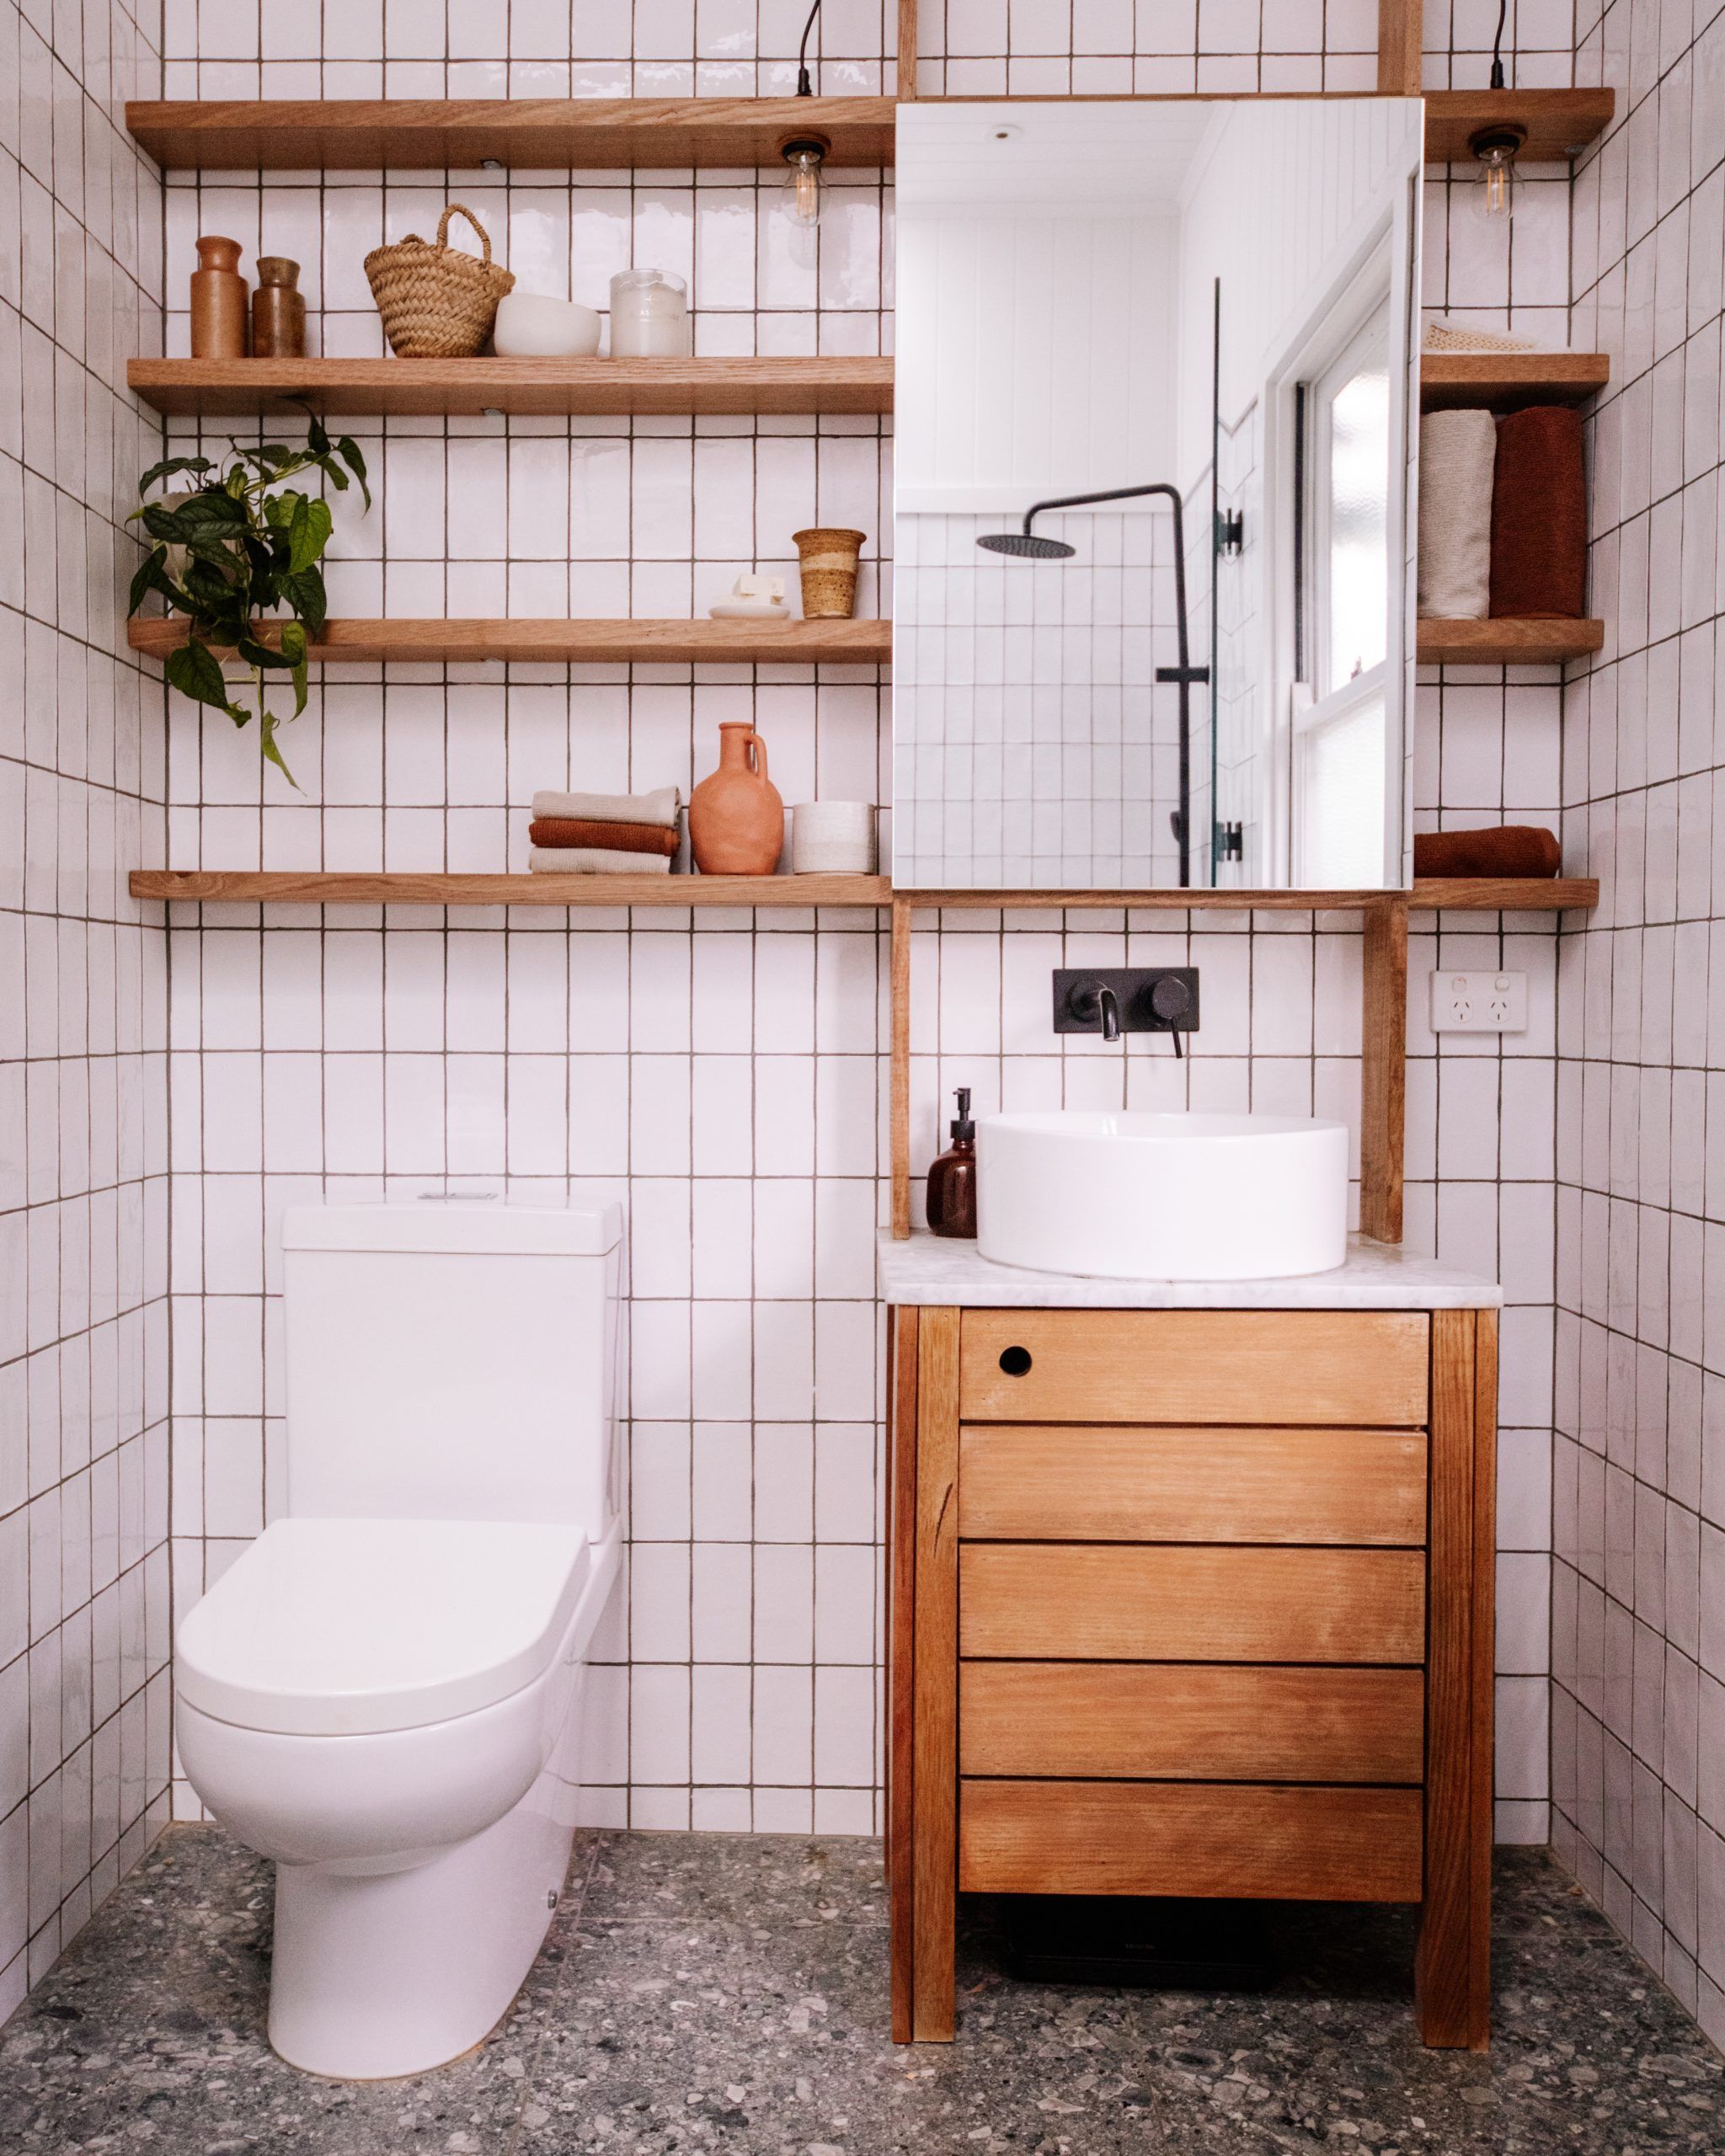 Utilizing Vertical Wall Space for Bathroom Storage